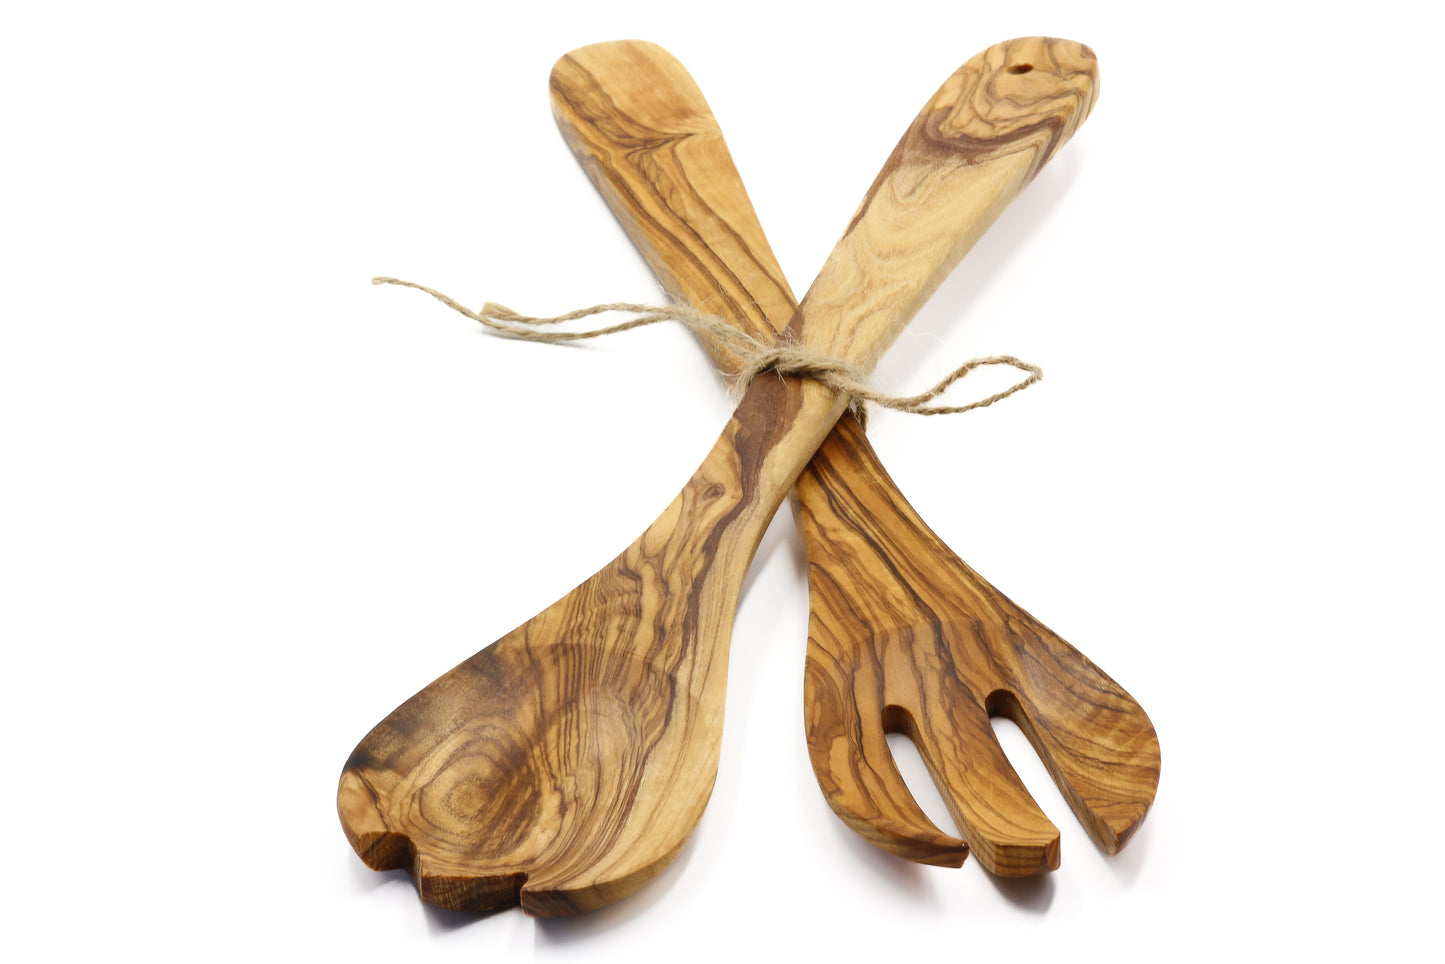 A stylish addition to your table: olive wood duo salad servers